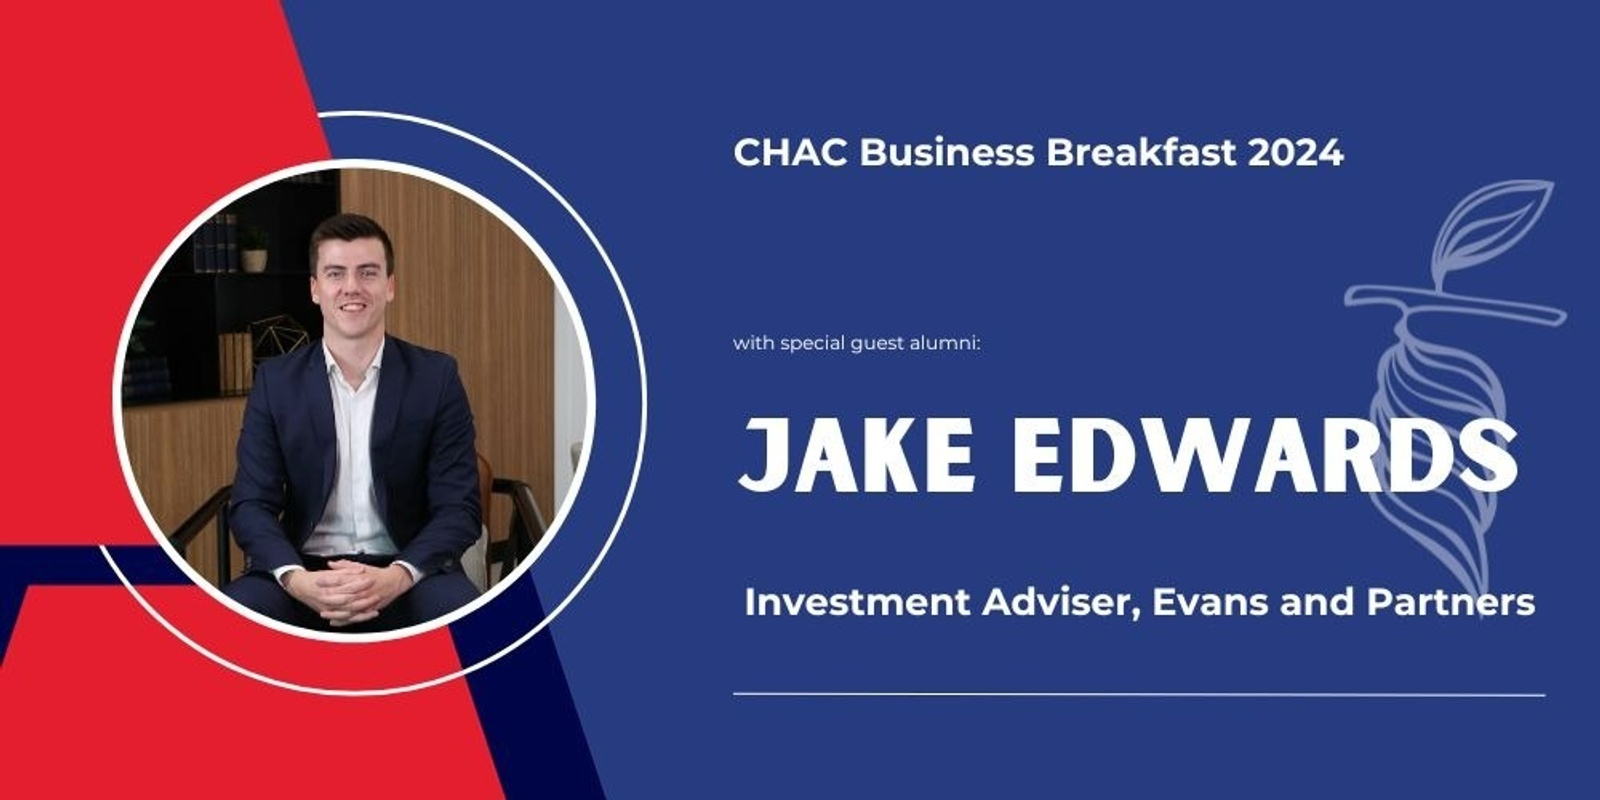 Banner image for CHAC Business Breakfast 2024 hosted by Jake Edwards